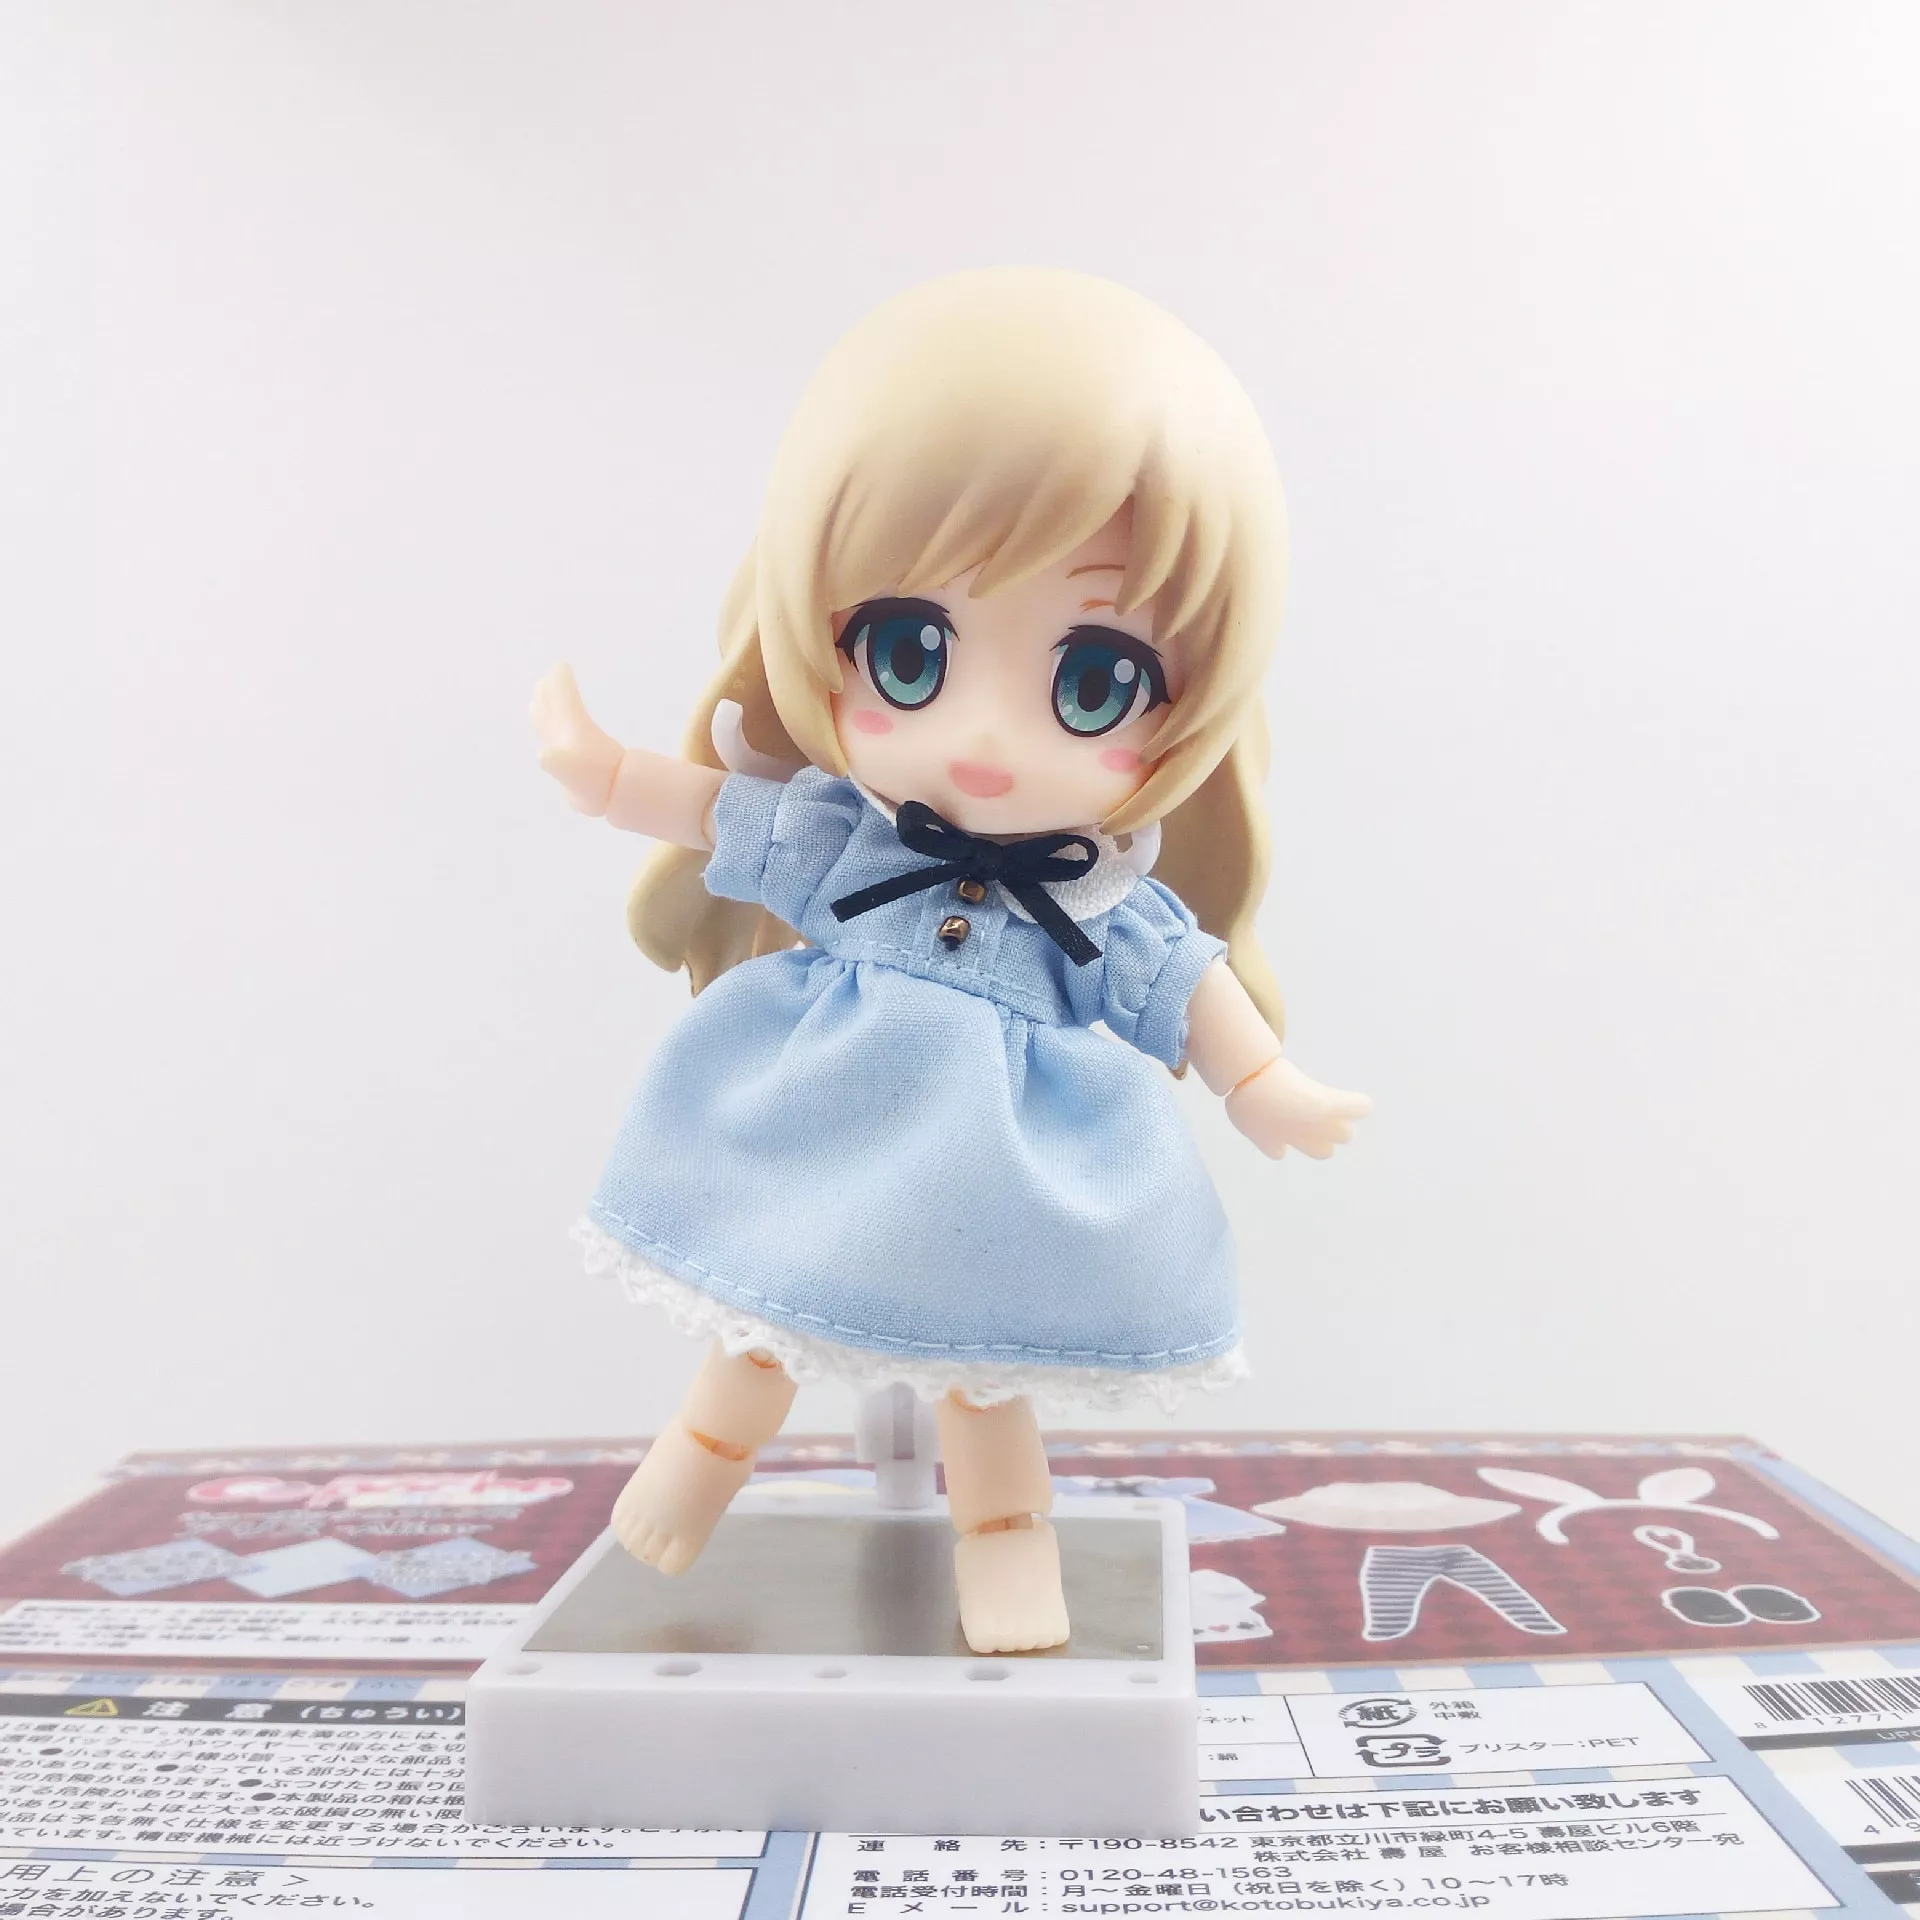 Cu-poche-friends-Alice-Bunny-Doll-PVC-Action-Figure-Collectible-Model-Toy-13CM-4000668701334-3